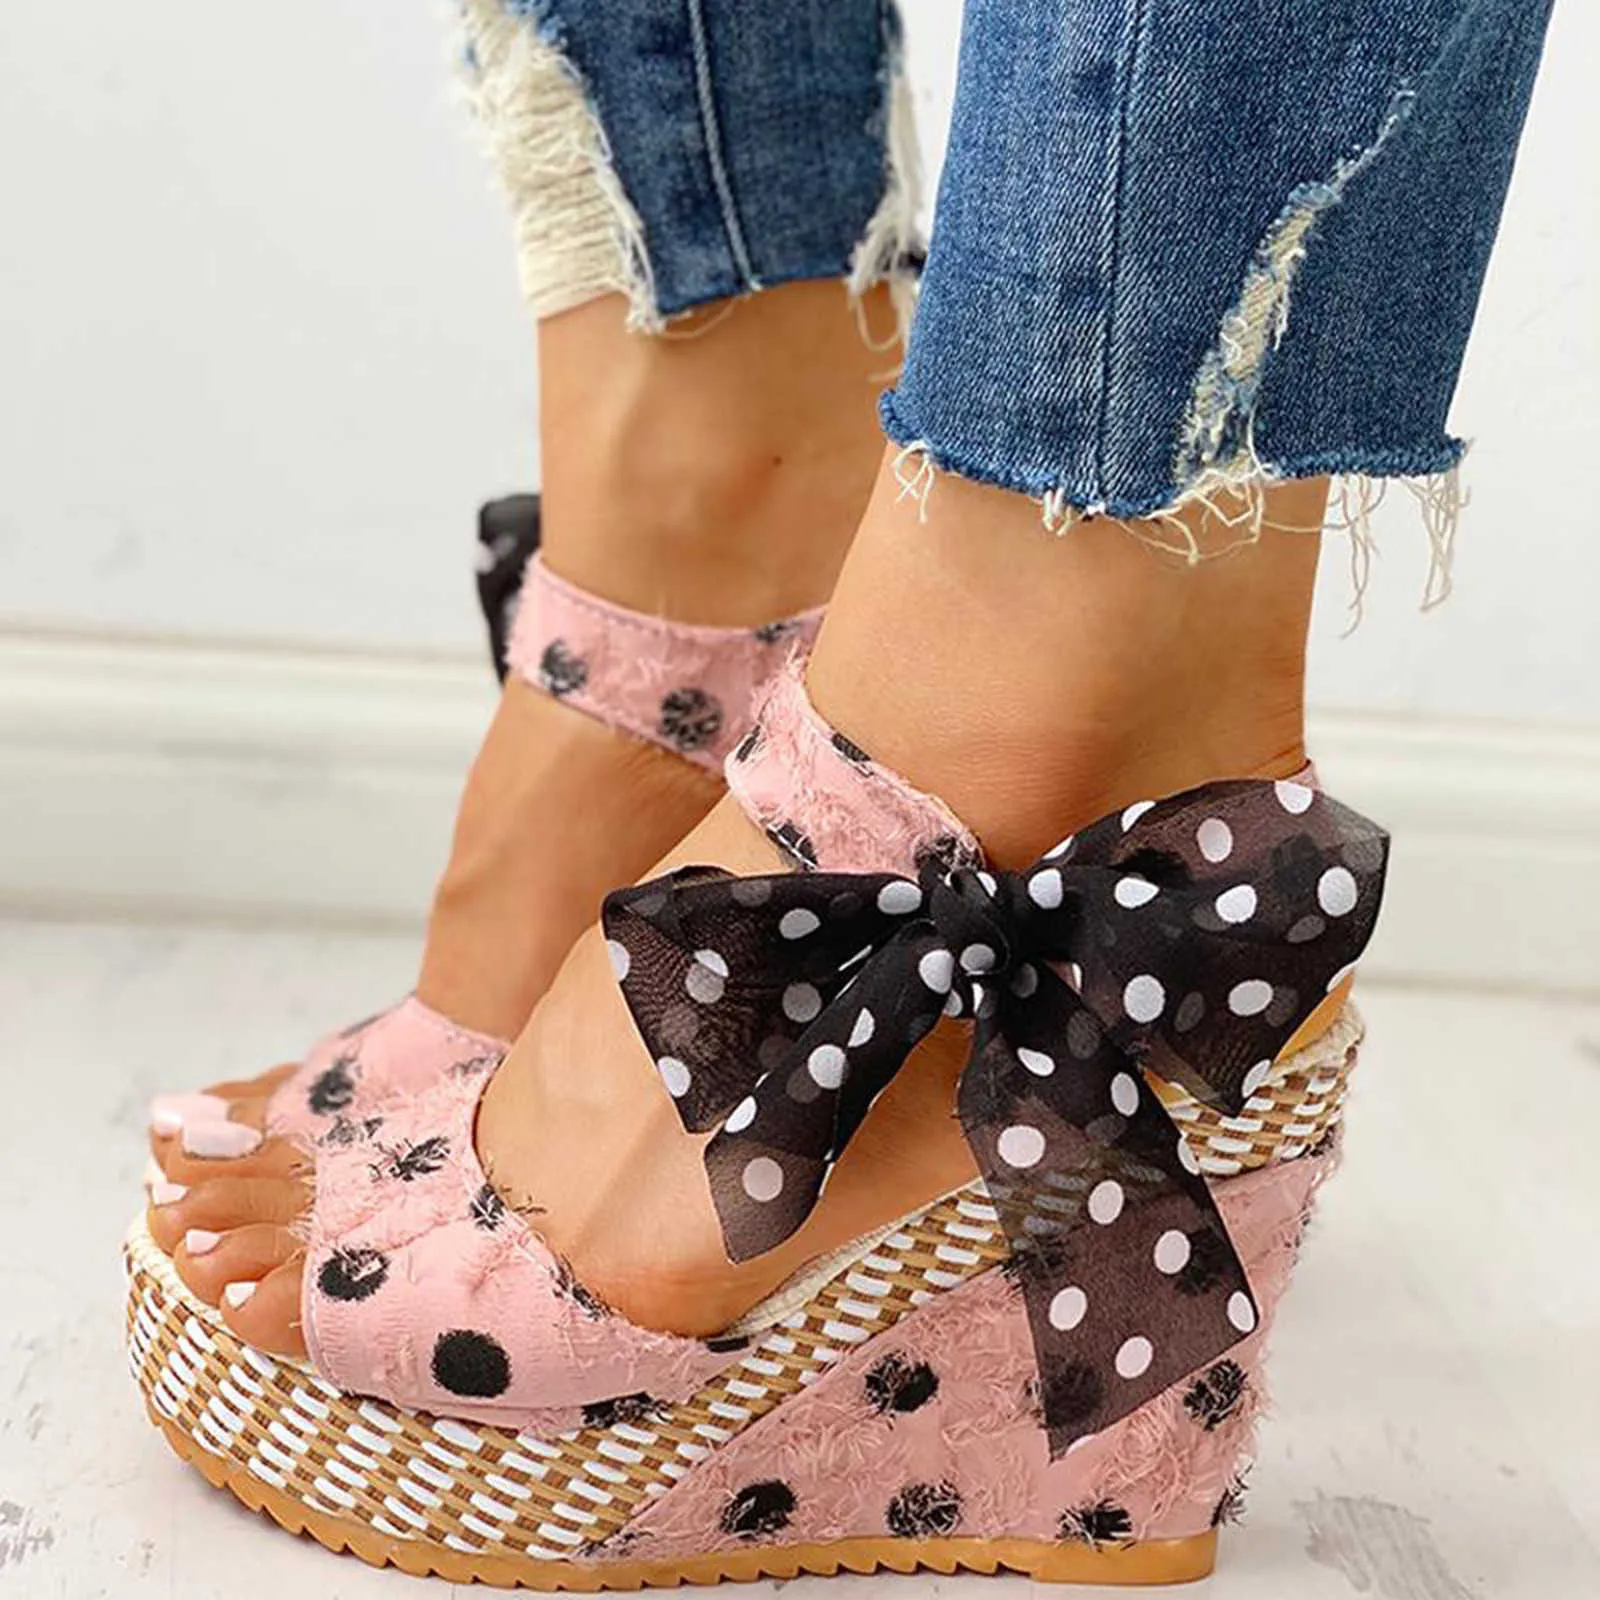 TELOTUNY sandals Women's Platform Wedges Heel Sandals Fashion Cotton Fabric Dot Lace-up Shoes Footwear 2021 Summer Y0721